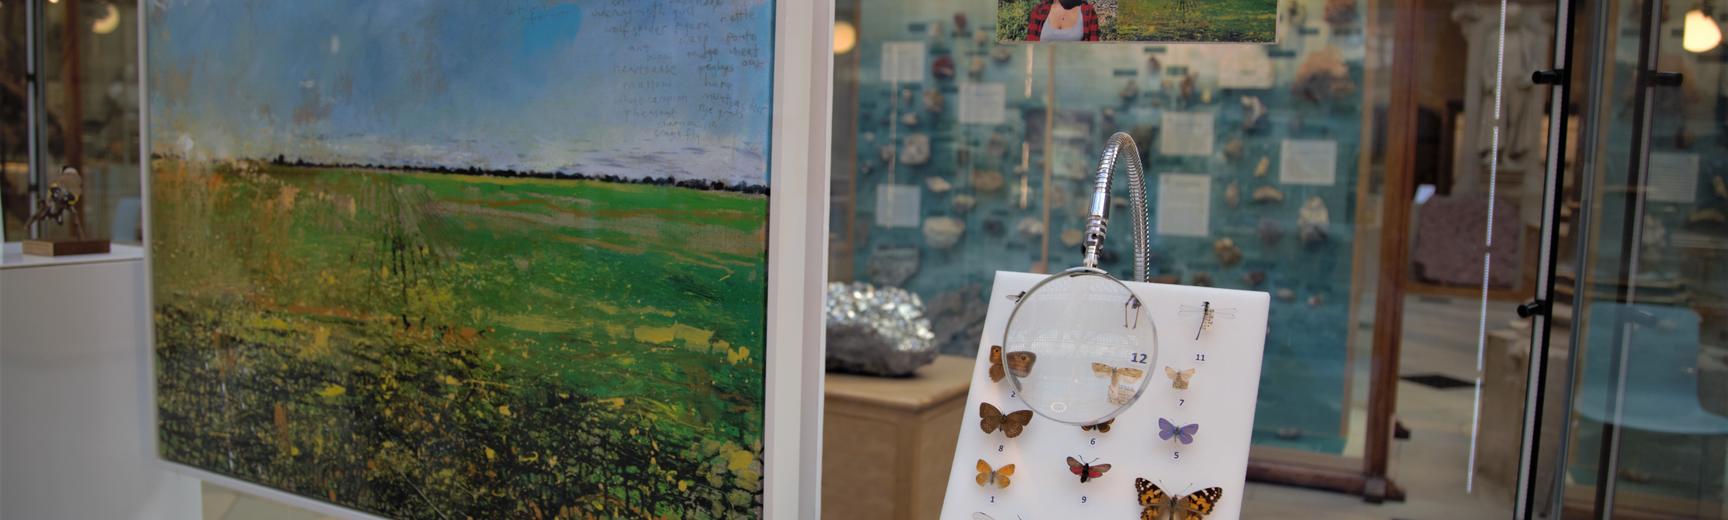 View of a display cabinet showing a Kurt Jackson painting and some butterfly specimens, part of the Biodiversity exhibition at the Museum